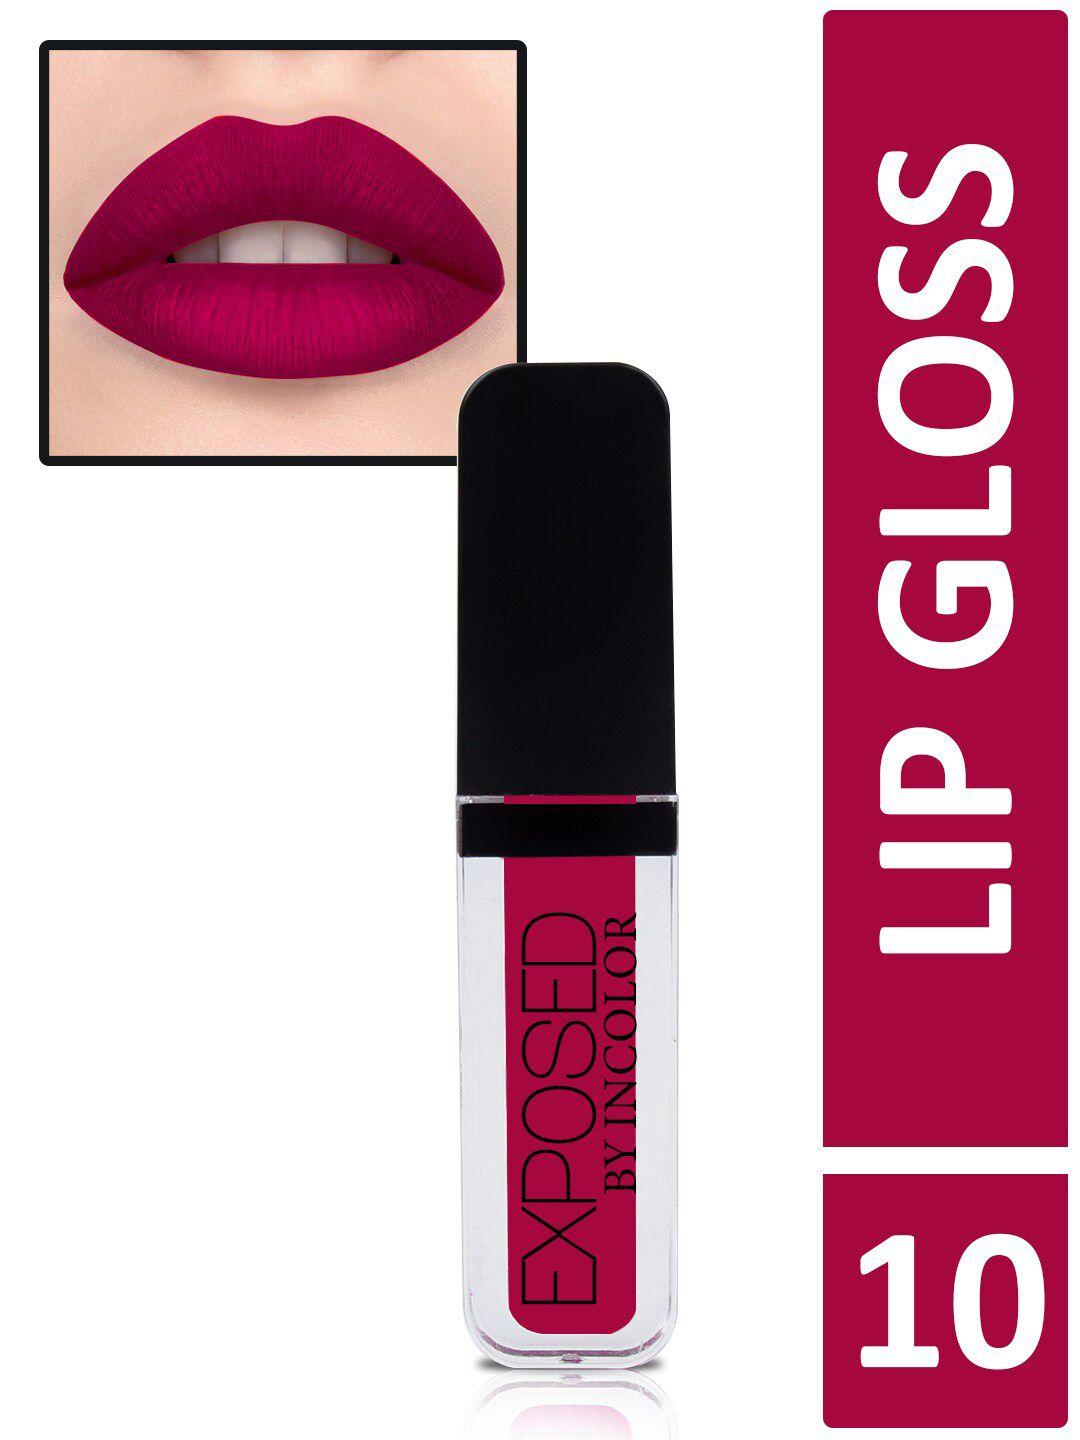 incolor exposed soft matte lip gloss 10 6 ml